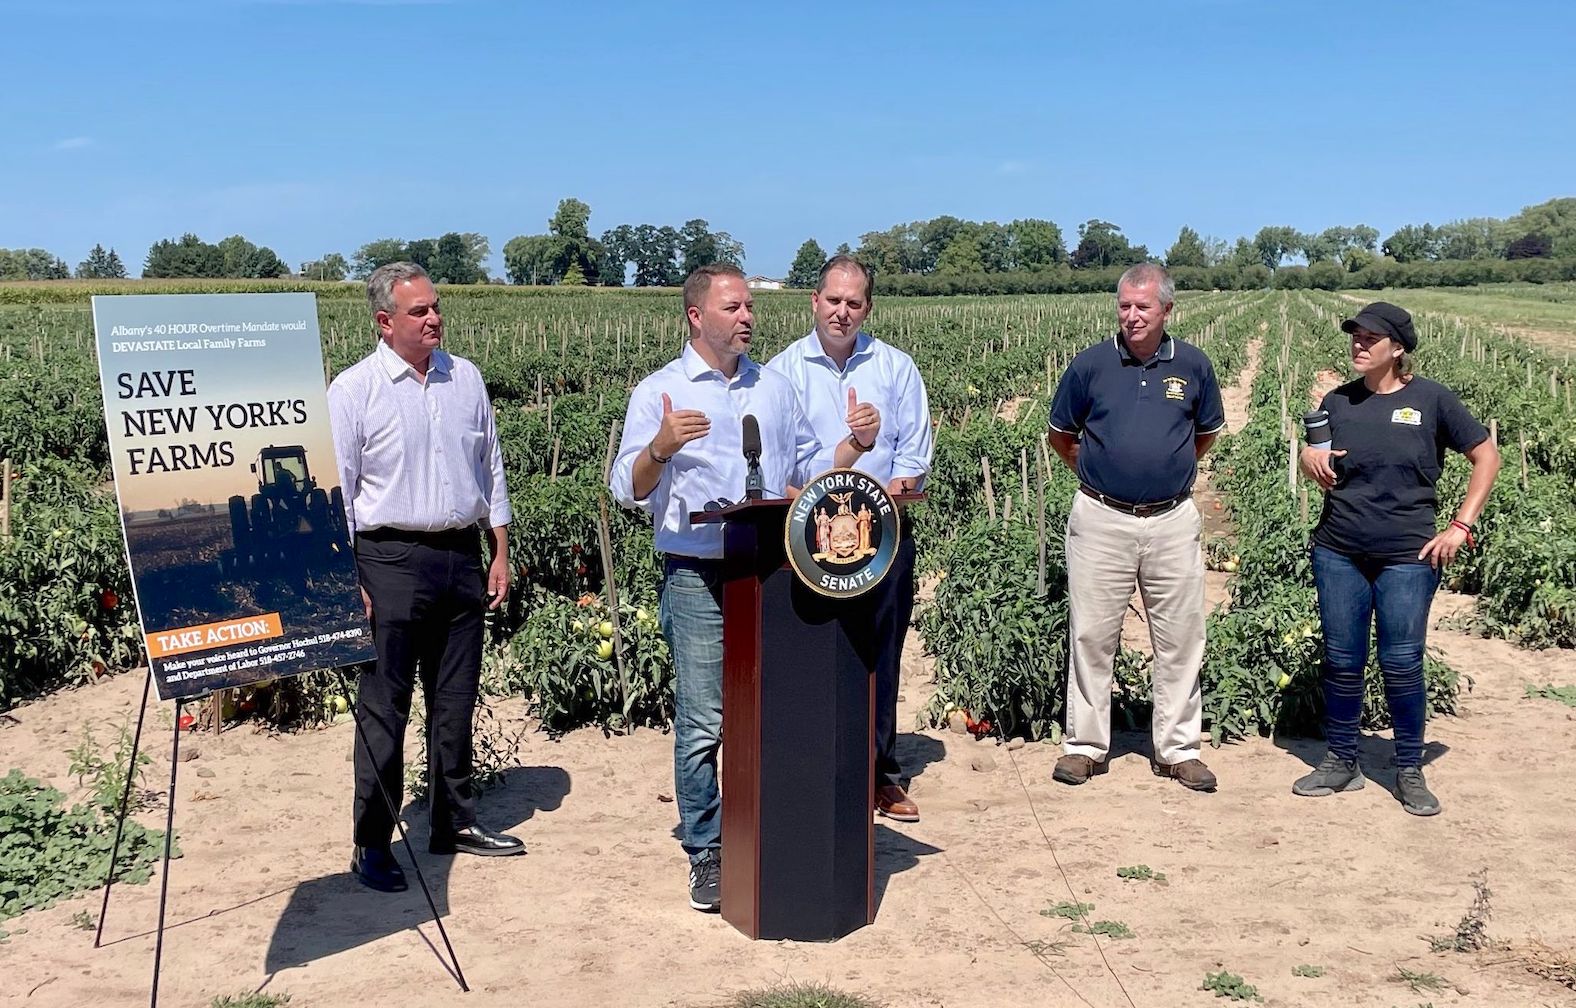 From left: New York State Sen. George Borrello, Senate Republican Leader Rob Ortt, Assemblyman Mike Norris, a representative for Assemblyman Steve Hawley, and Niagara County Farm Bureau President Jeanette Miller at a press conference. (Submitted photo)